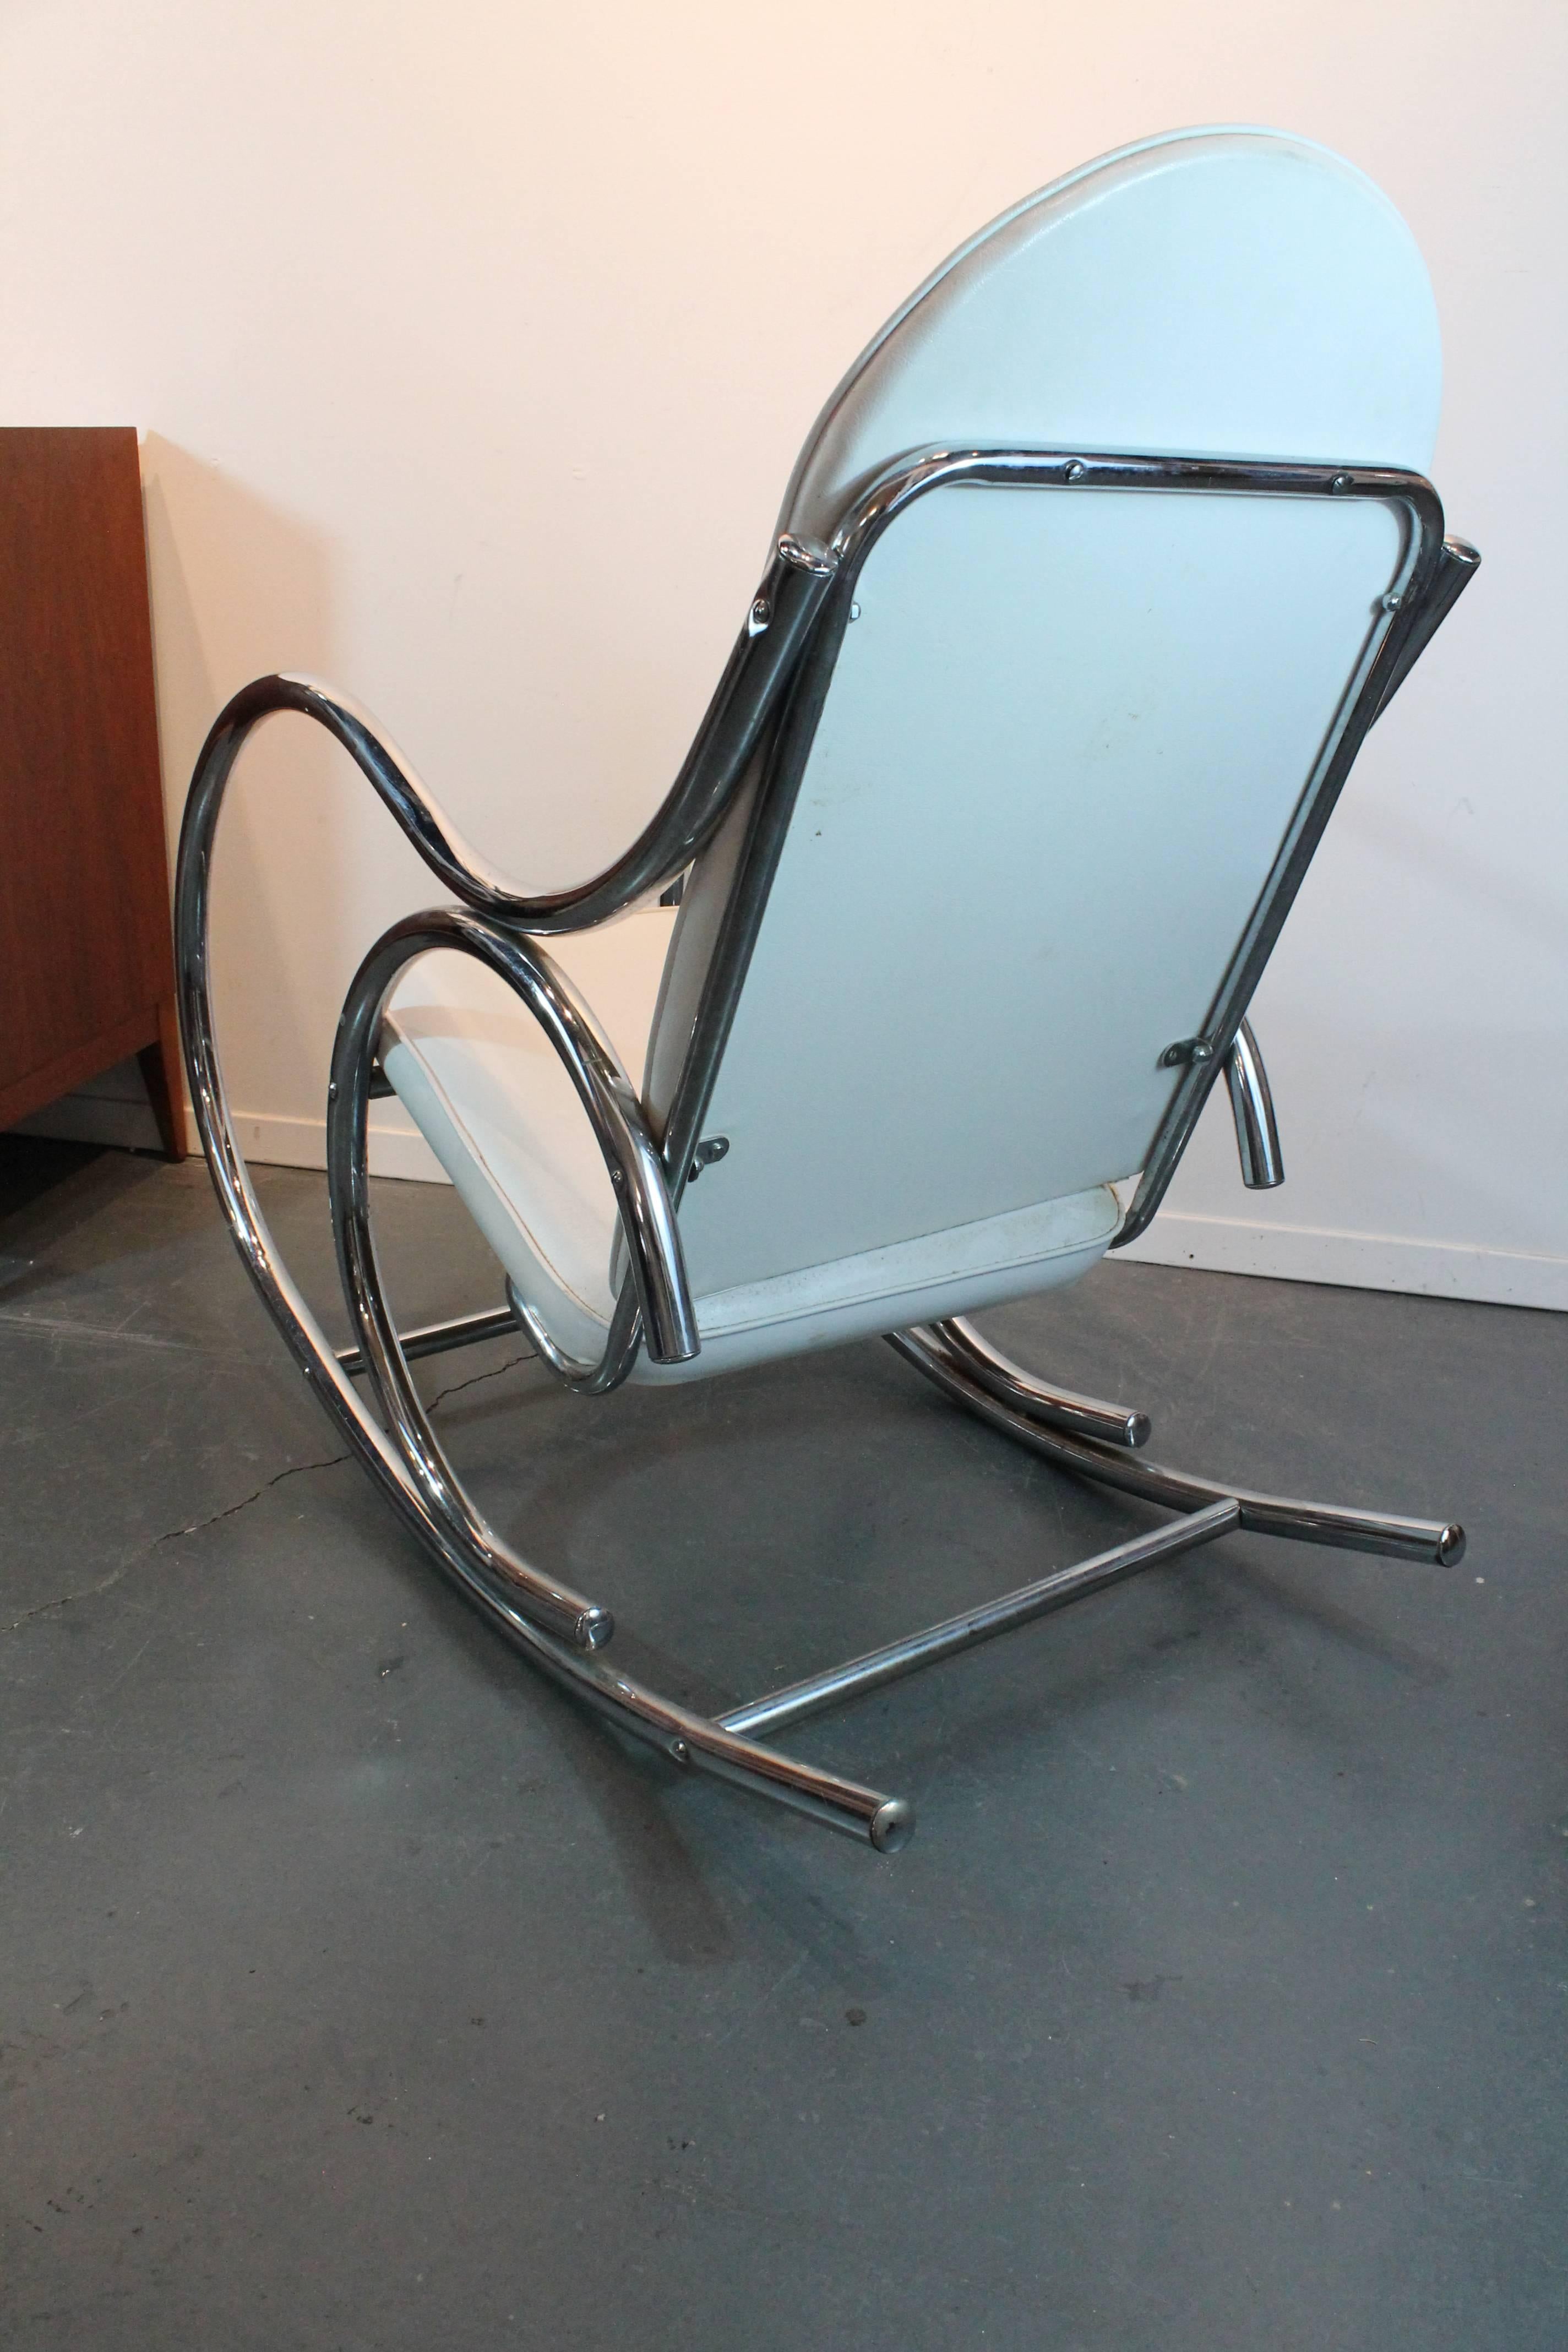 1970's Chrome Sculptural Rocking Chair In Excellent Condition For Sale In 3 Oaks, MI